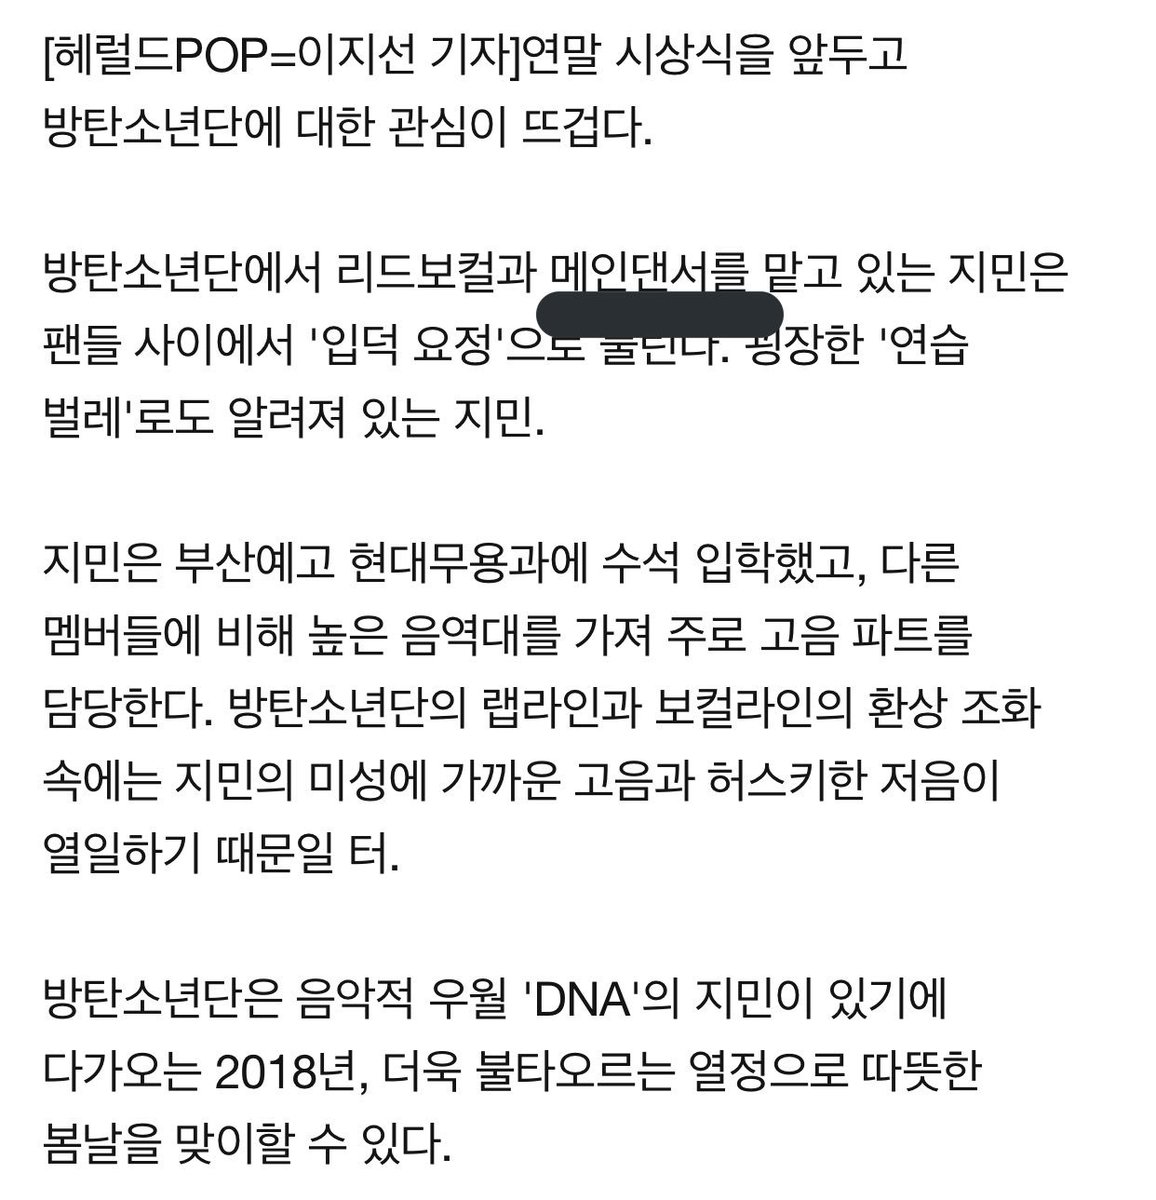 Jimin was mentioned again Dec. 26, 2017  http://m.entertain.naver.com/read?oid=112&aid=0002987858&lfrom=twitter